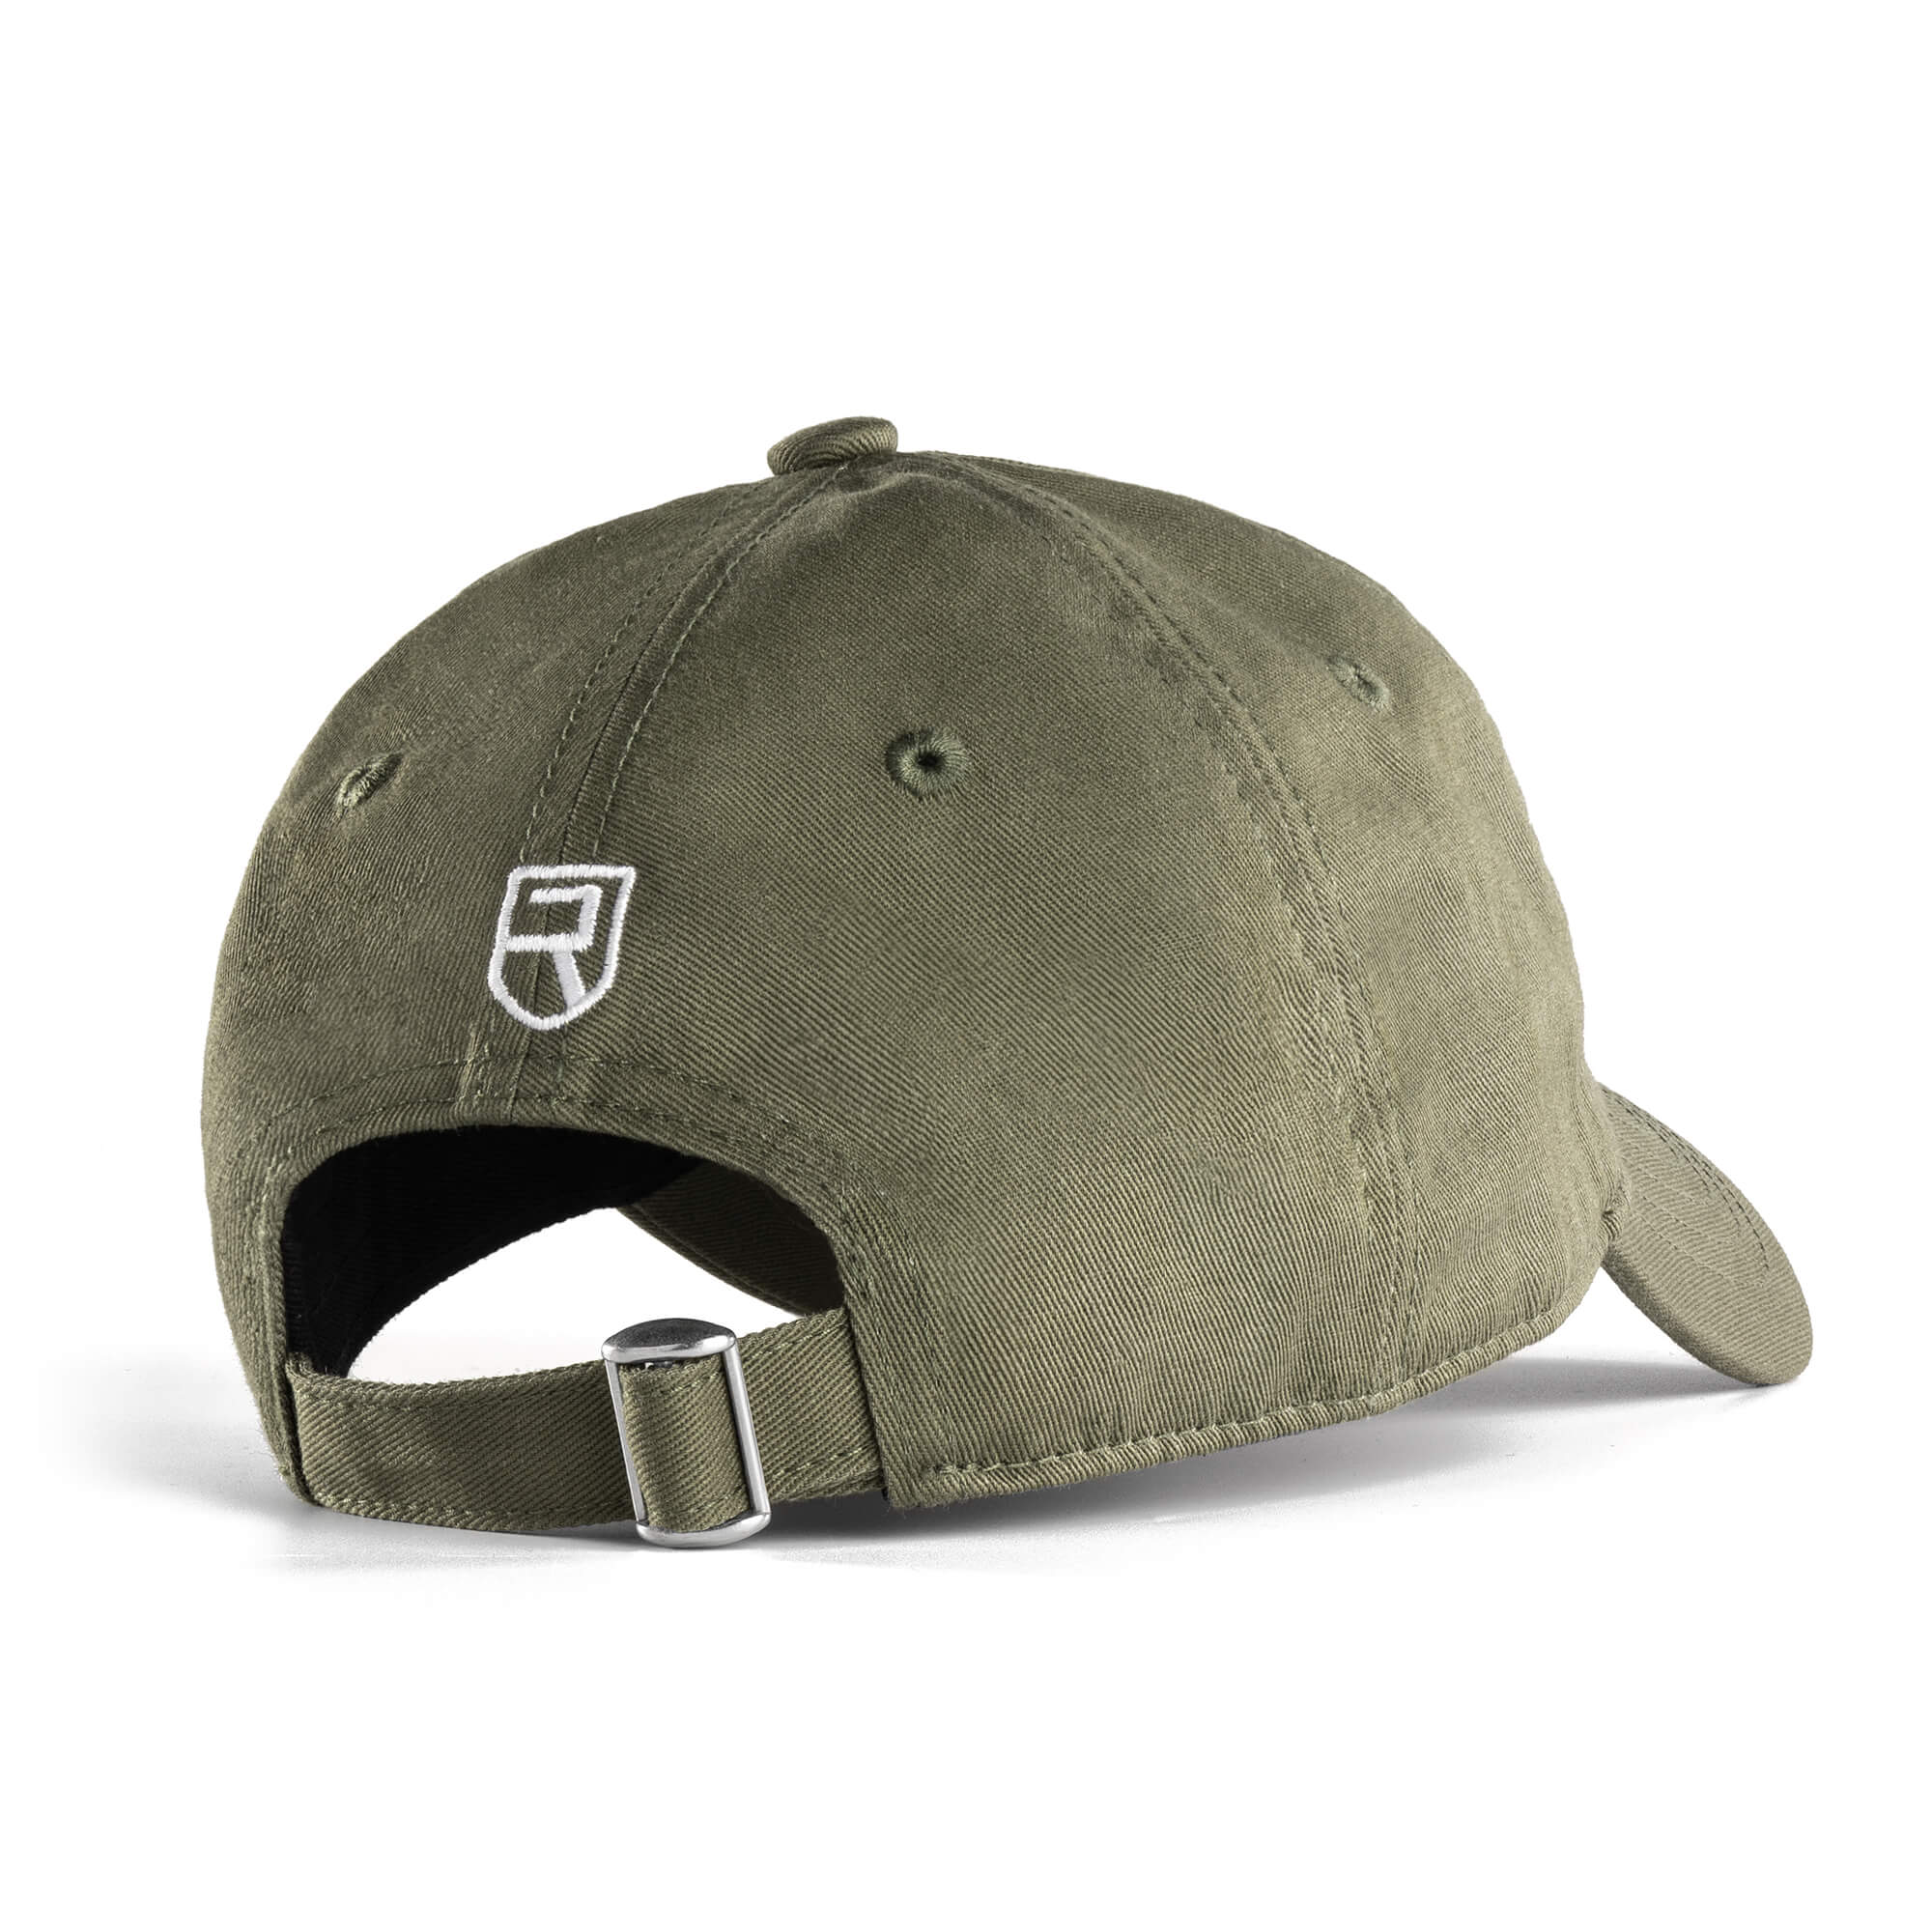 Signature Dad Hat - Army Green